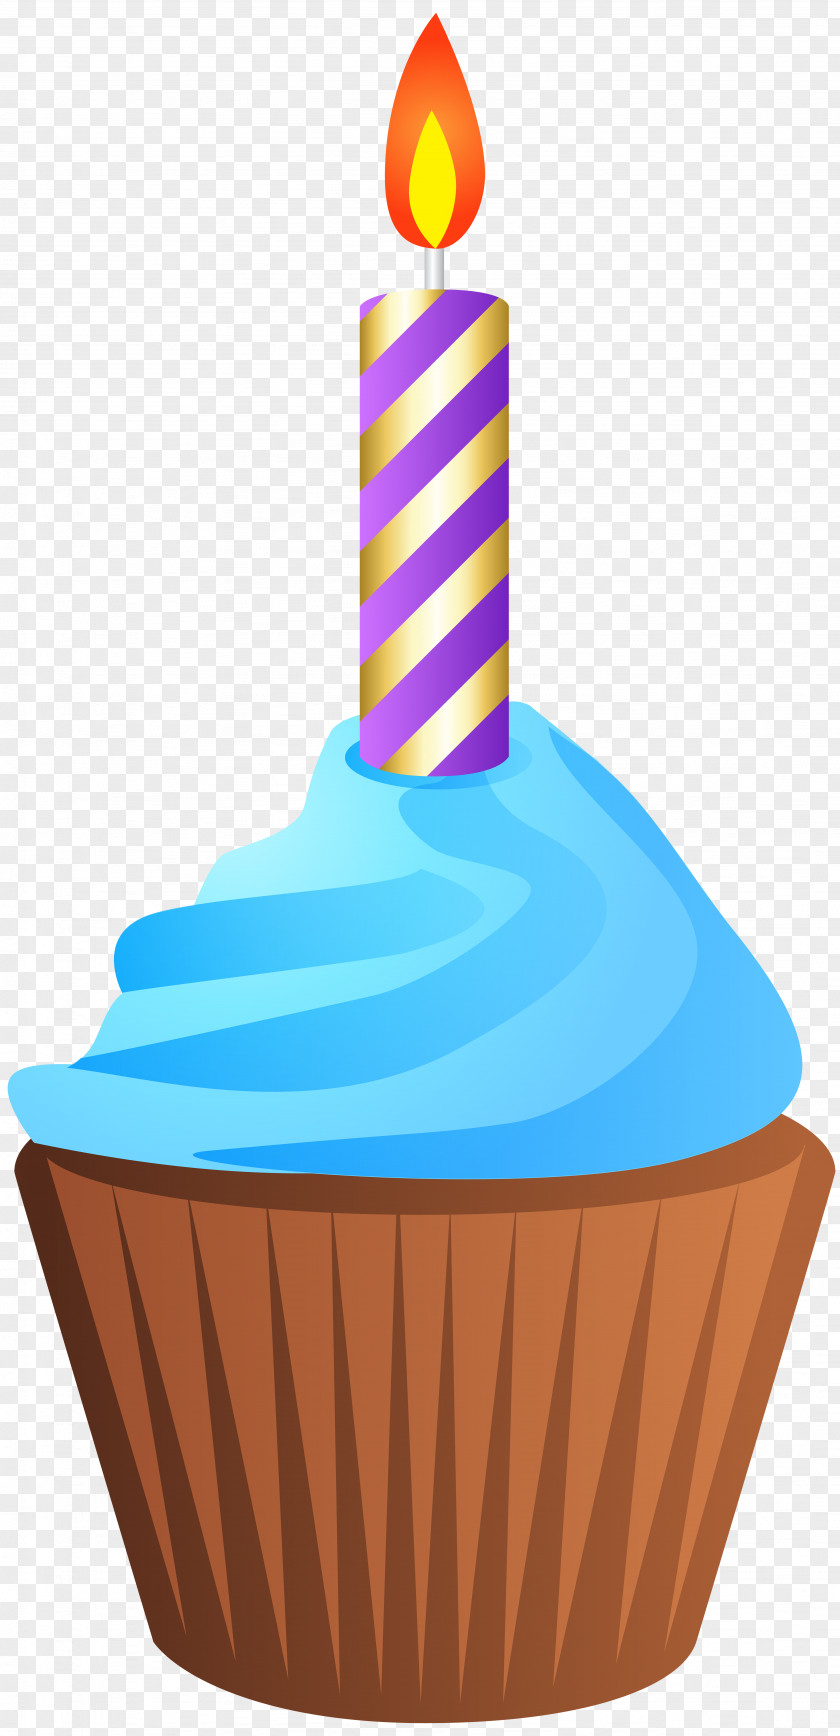 Birthday Muffin With Candle Transparent Clip Art Image Cake PNG